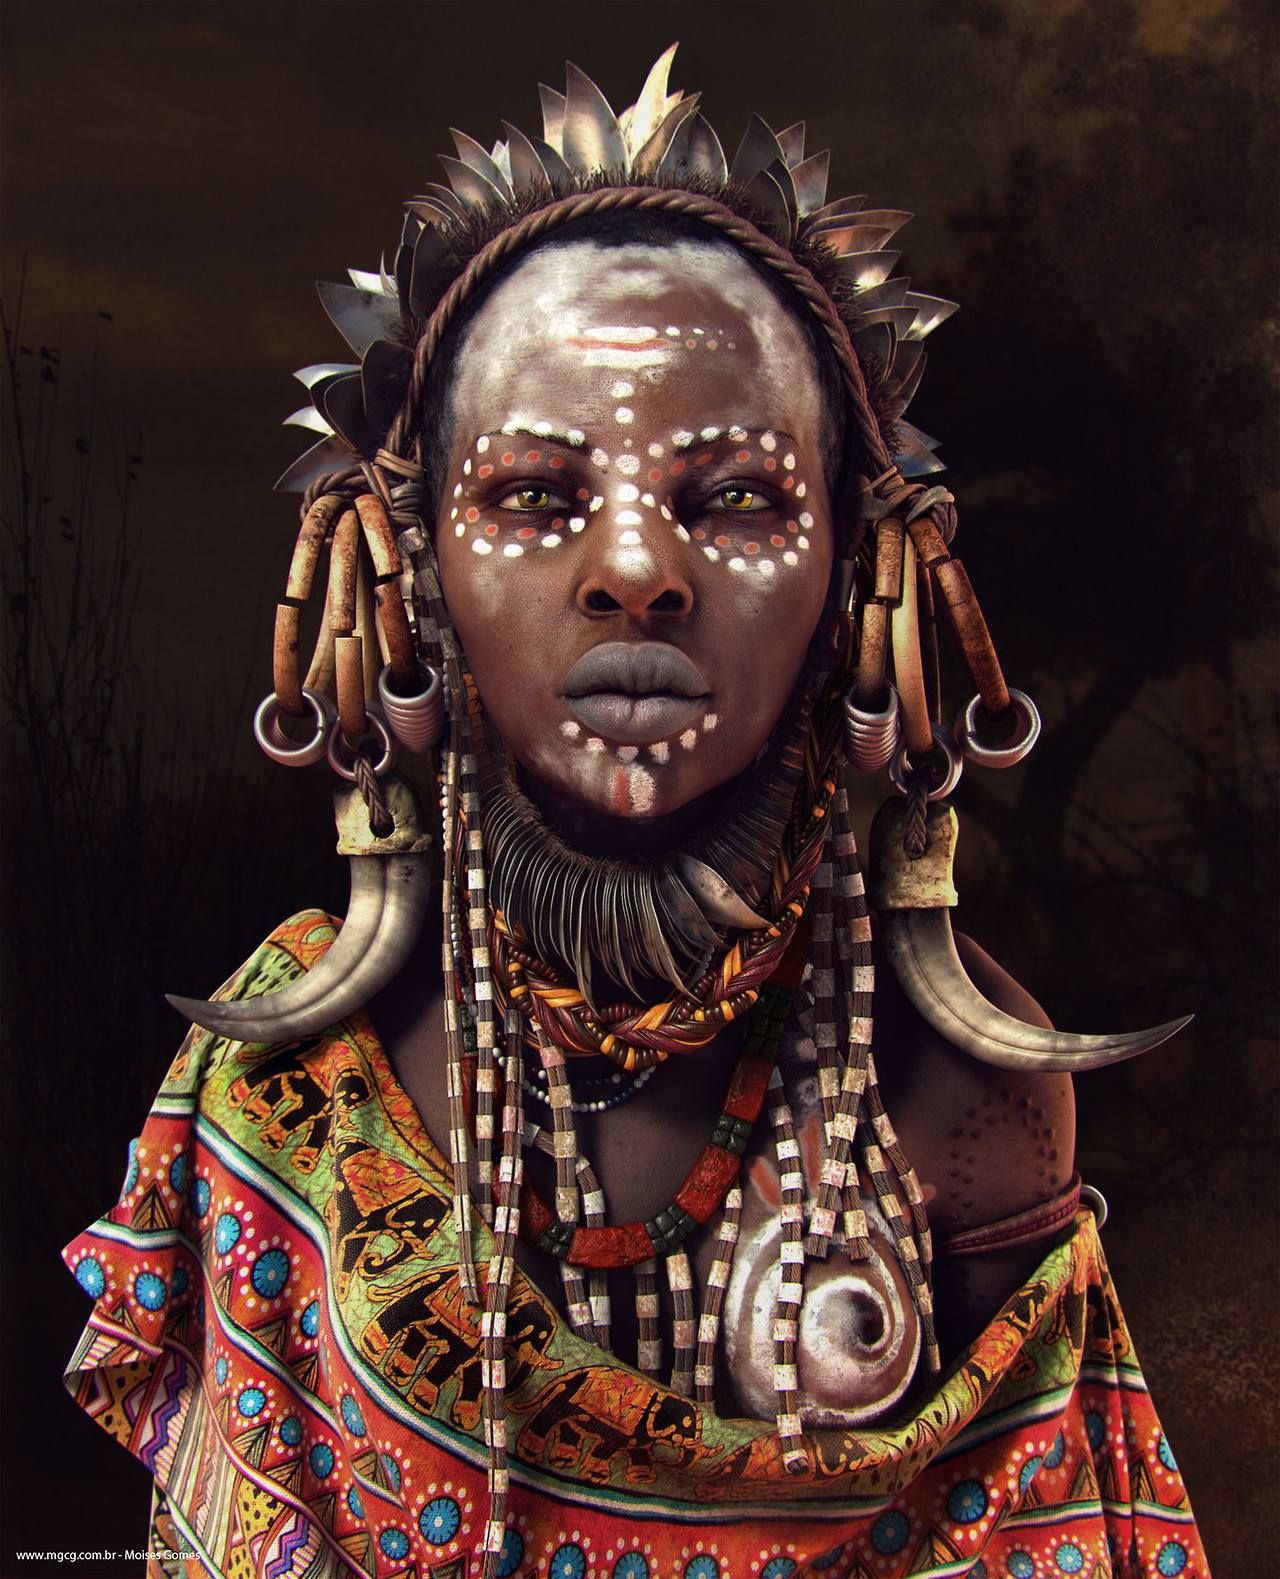 Mursi woman | CULTURES OF THE WORLD | Pinterest | Woman, Africa and ...